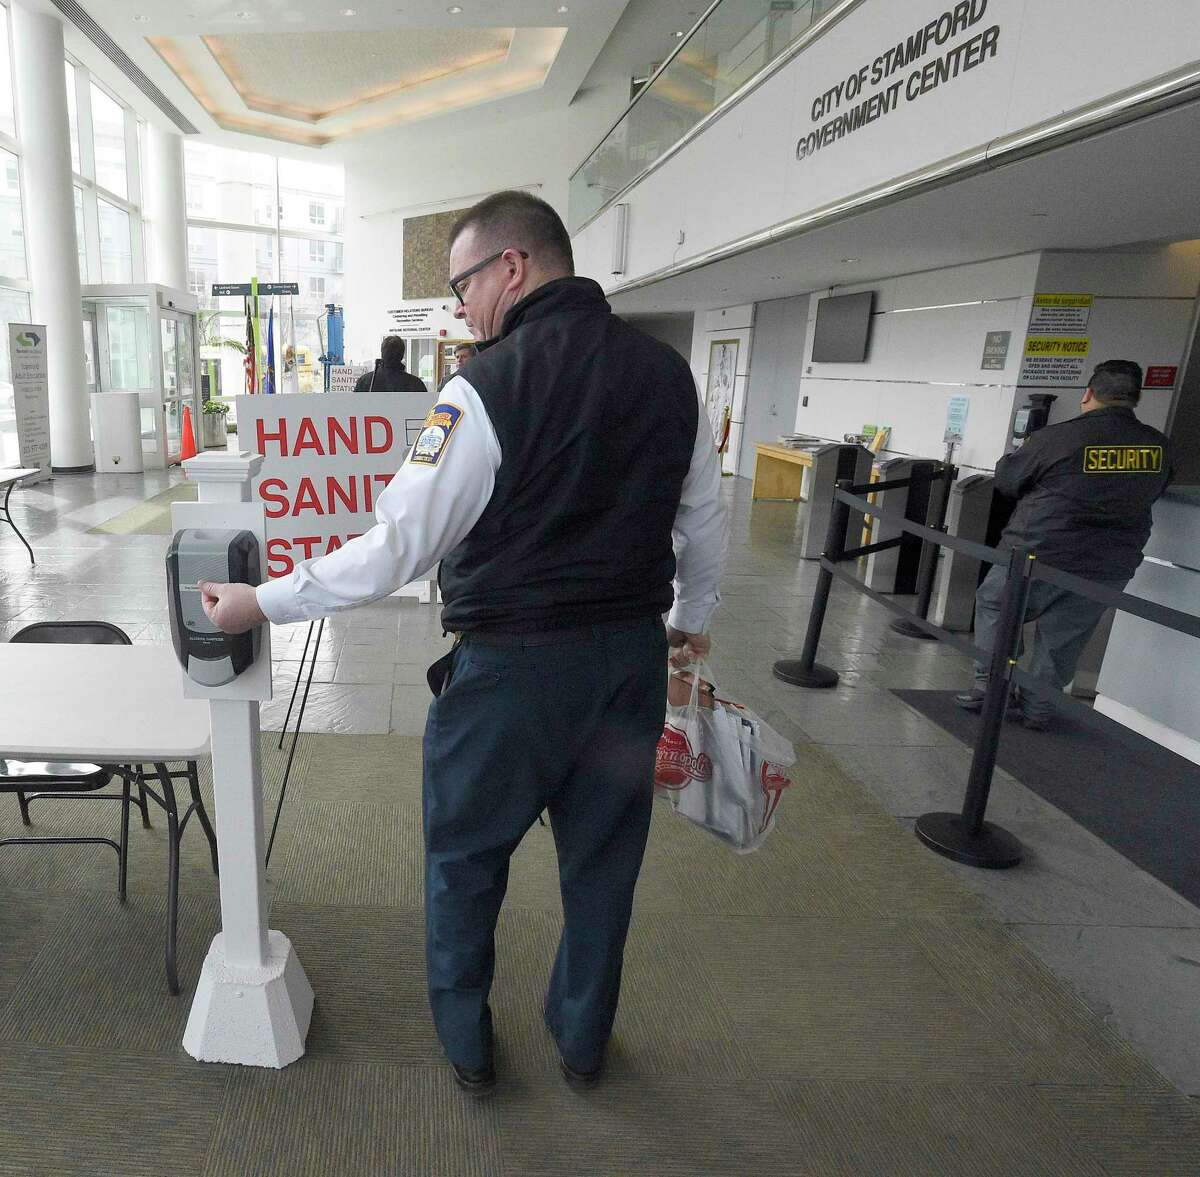 A city employee uses a hand sanitizer station as they enter the Stamford Government Center on March 11, 2020 in Stamford, Connecticut. Stamford Mayor David Martin implemented this past Friday, everyone must hand sanitize before entering city buildings due to COVID-19 Coronavirus outbreak.